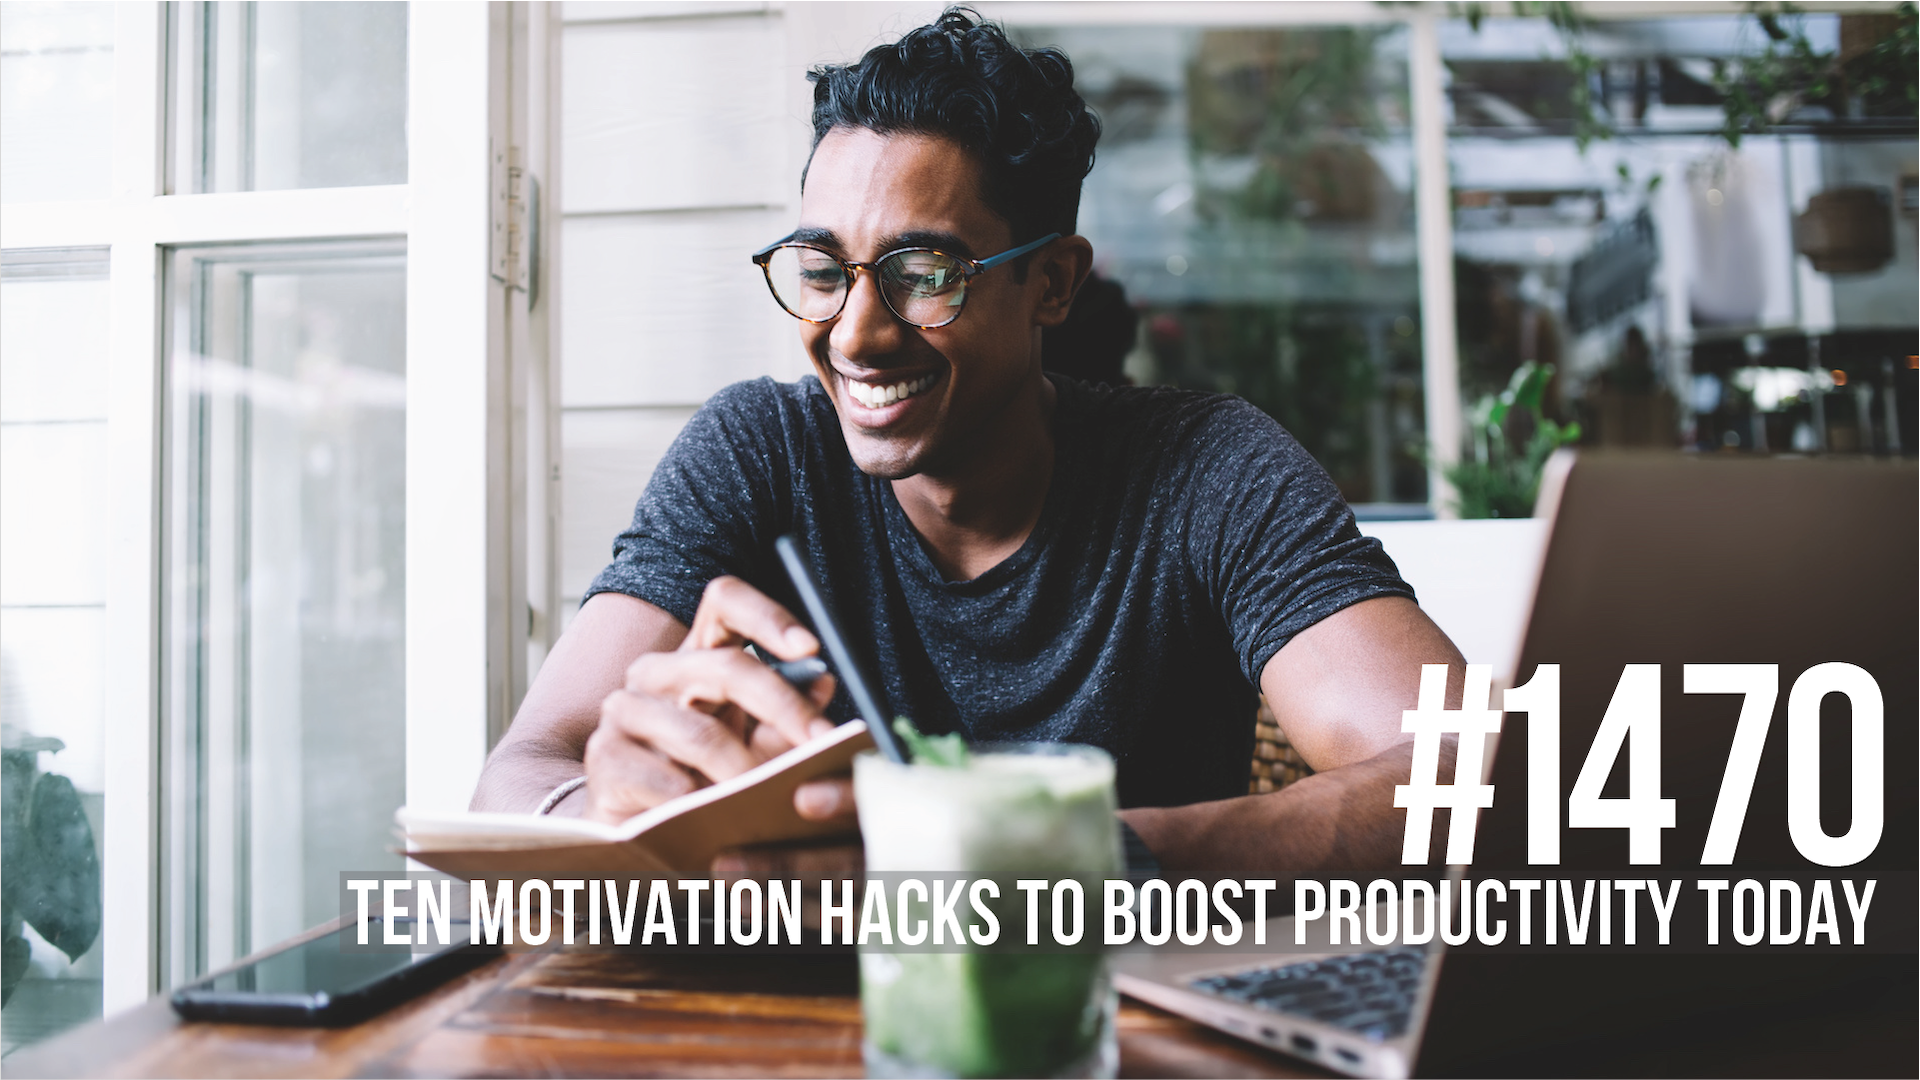 1470: Ten Motivation Hacks to Boost Productivity Today